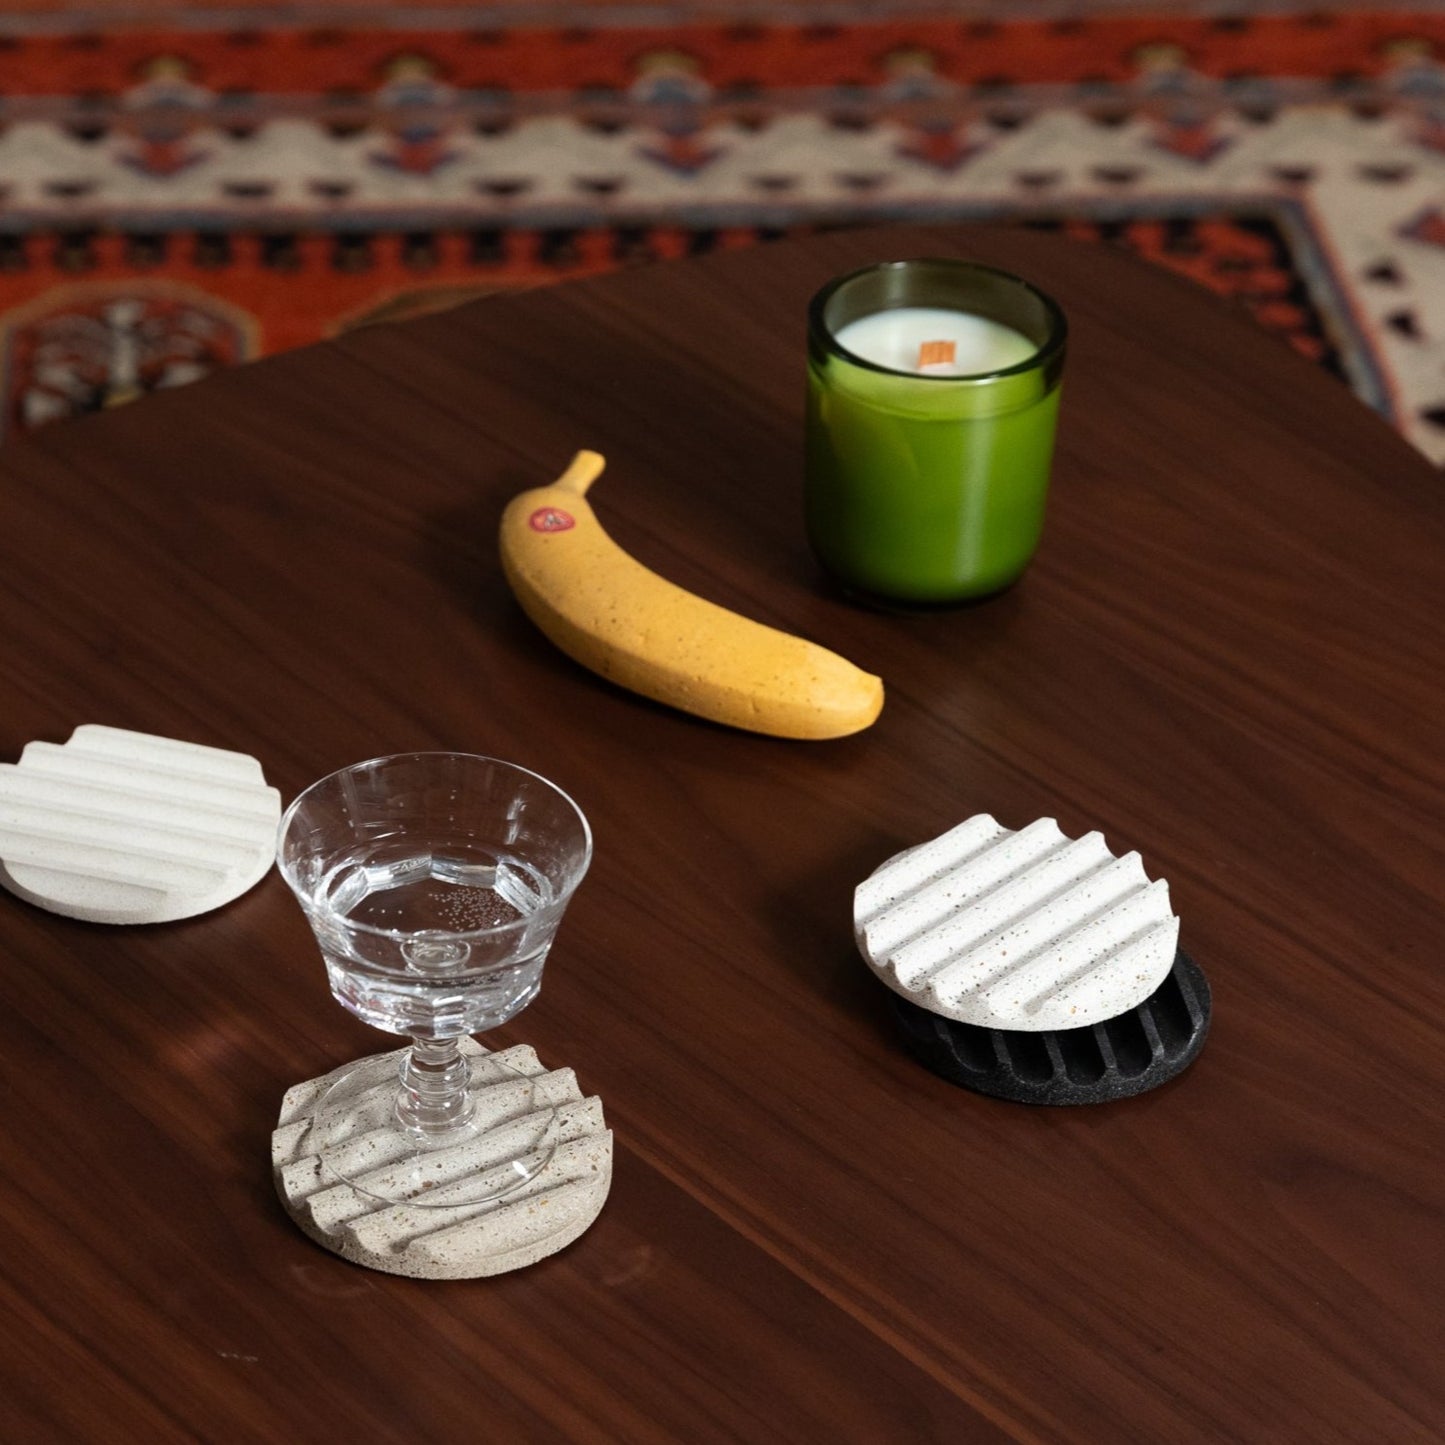 the banana, grey scale coasters, and soy candle, styled.